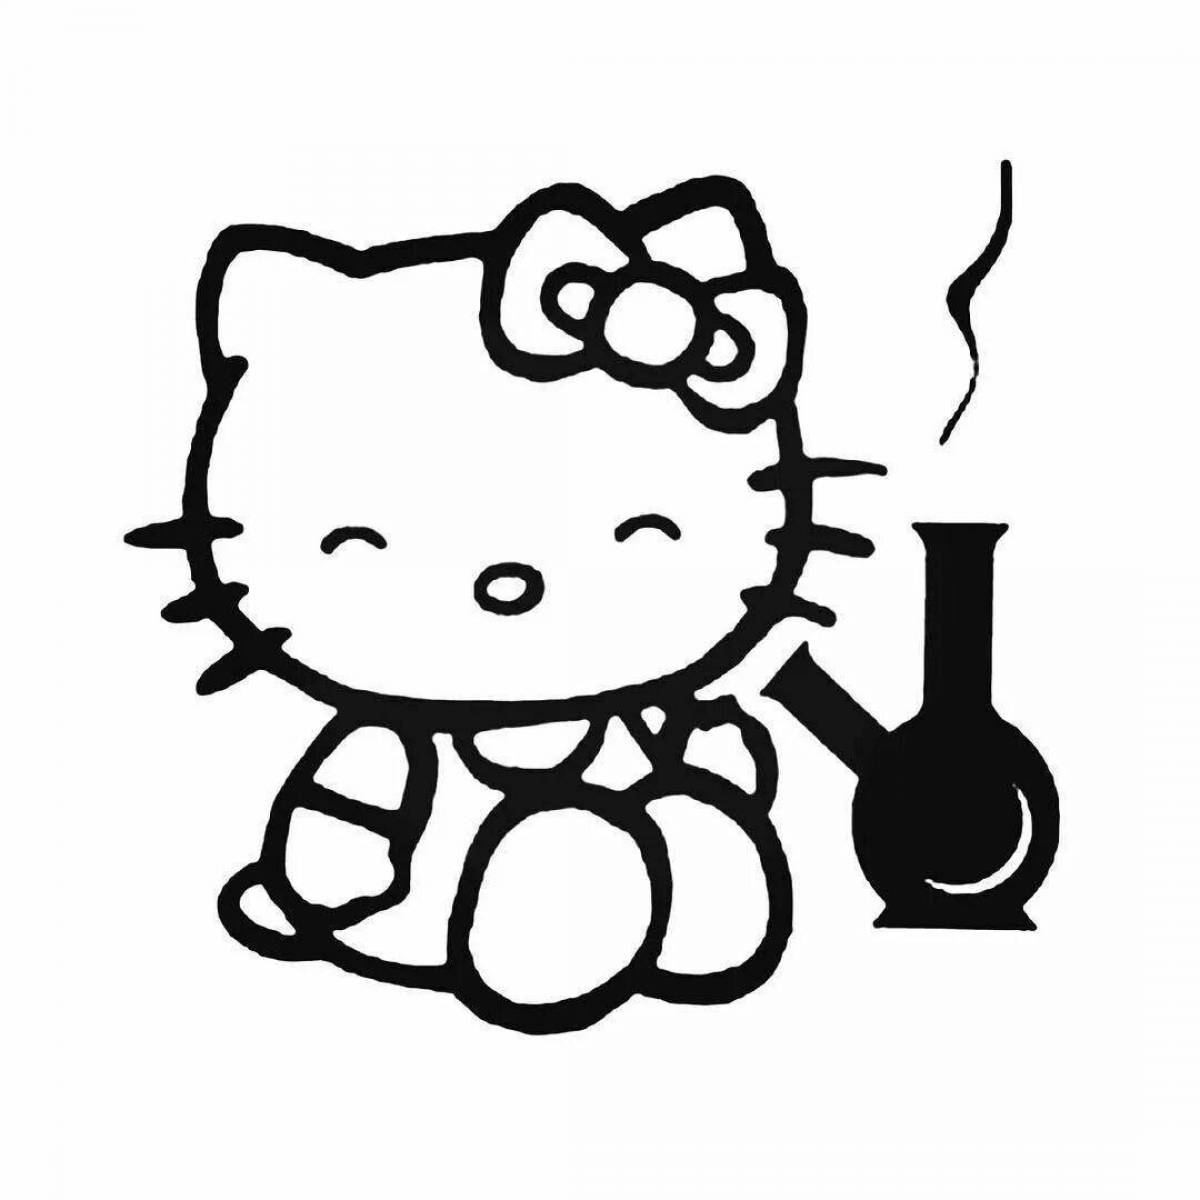 Adorable hello kitty sticker coloring page